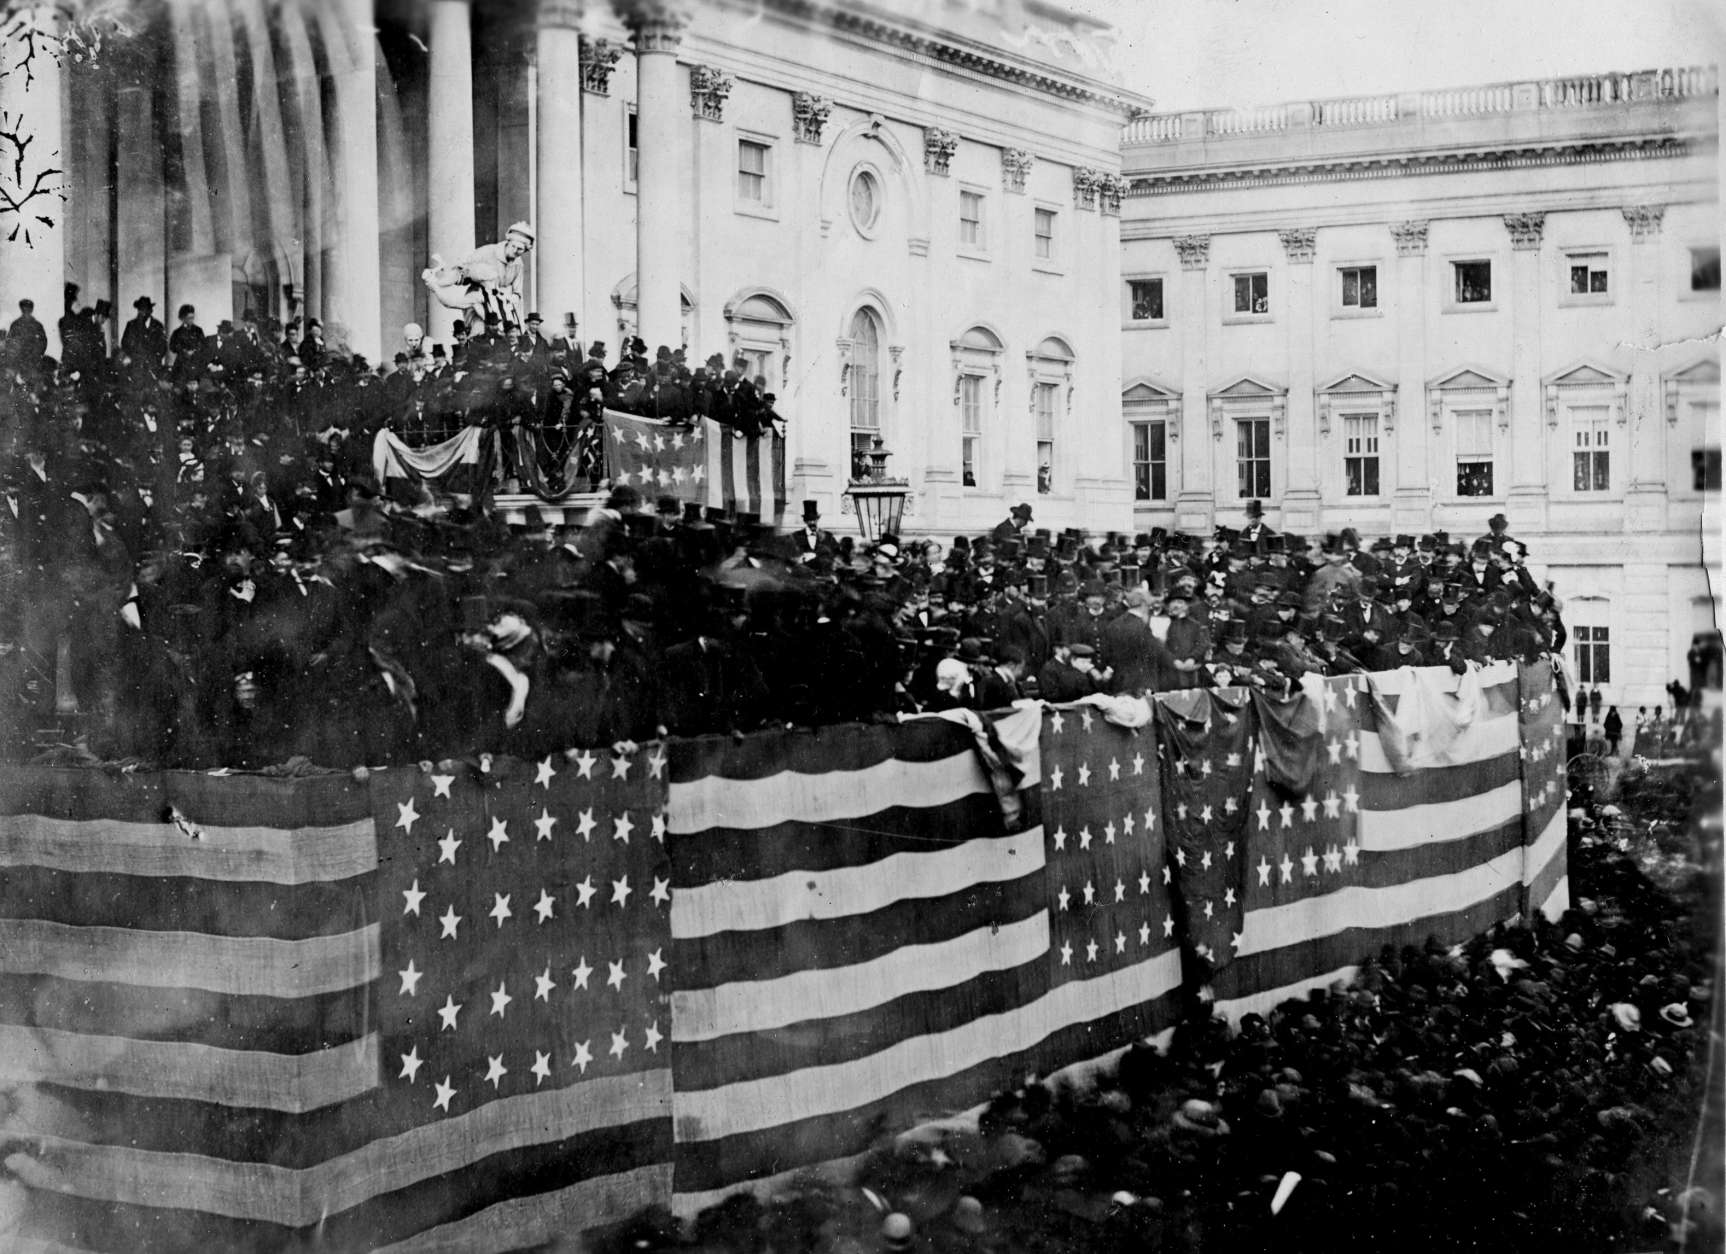 The public inauguration of Rutherford B. Hayes takes place in front of the U.S. Capitol on the East Portico in Washington, D.C., on March 5, 1877.   (AP Photo)